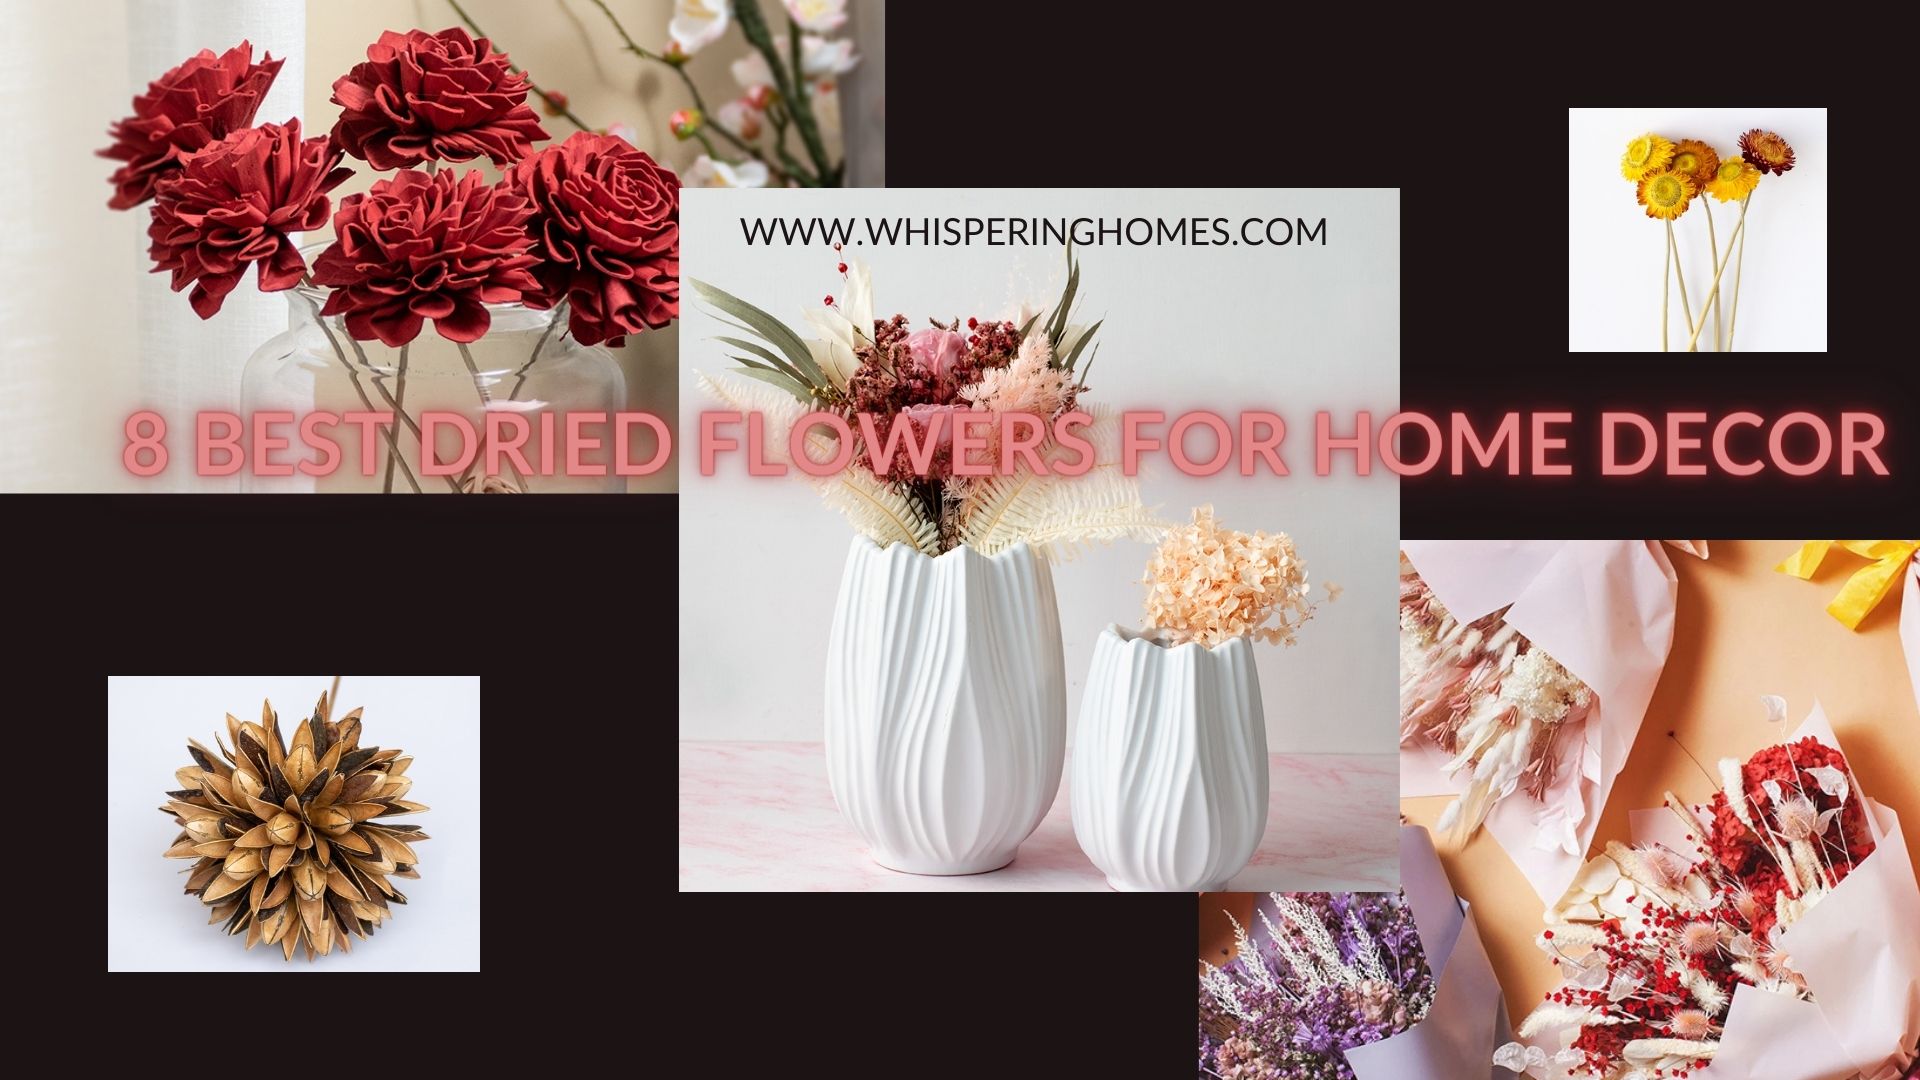 8 Best Dried Flowers for Home Decor